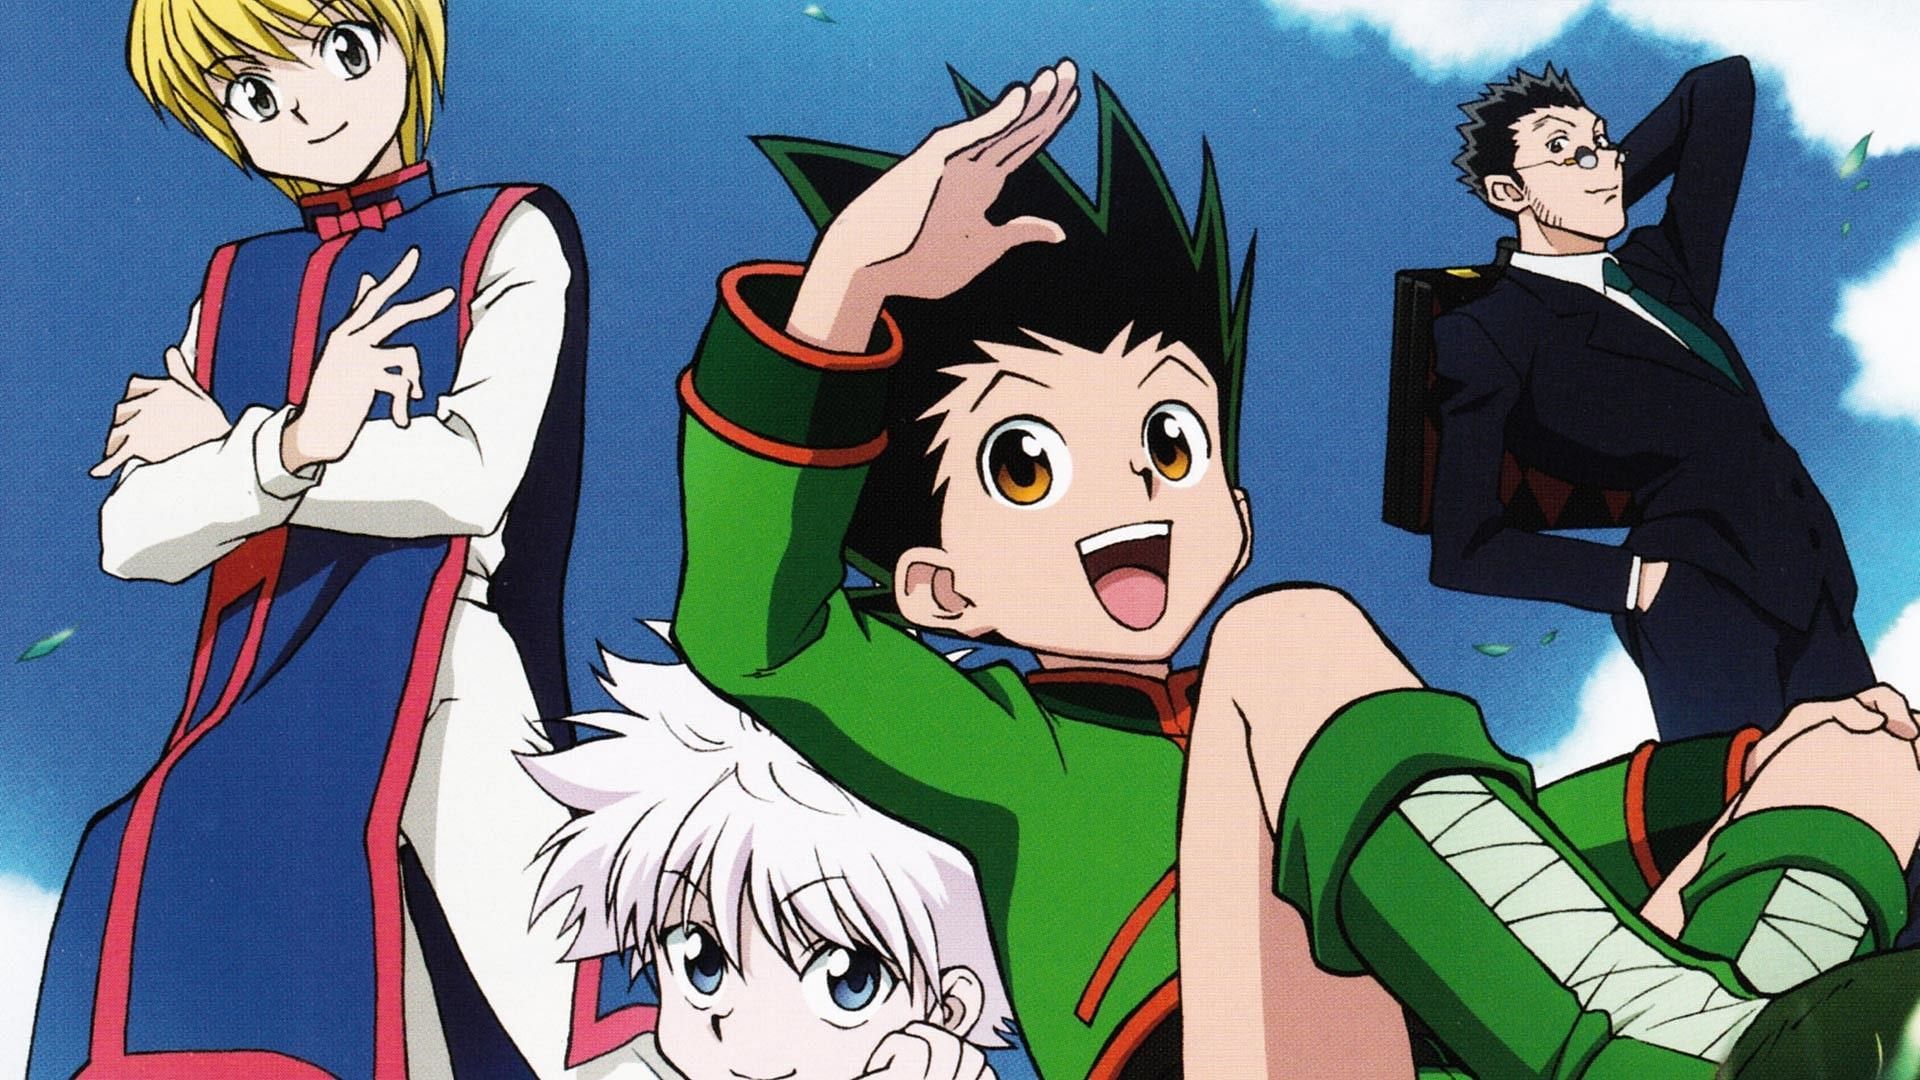 When will Hunter x Hunter return? Expected release date for Chapter 391